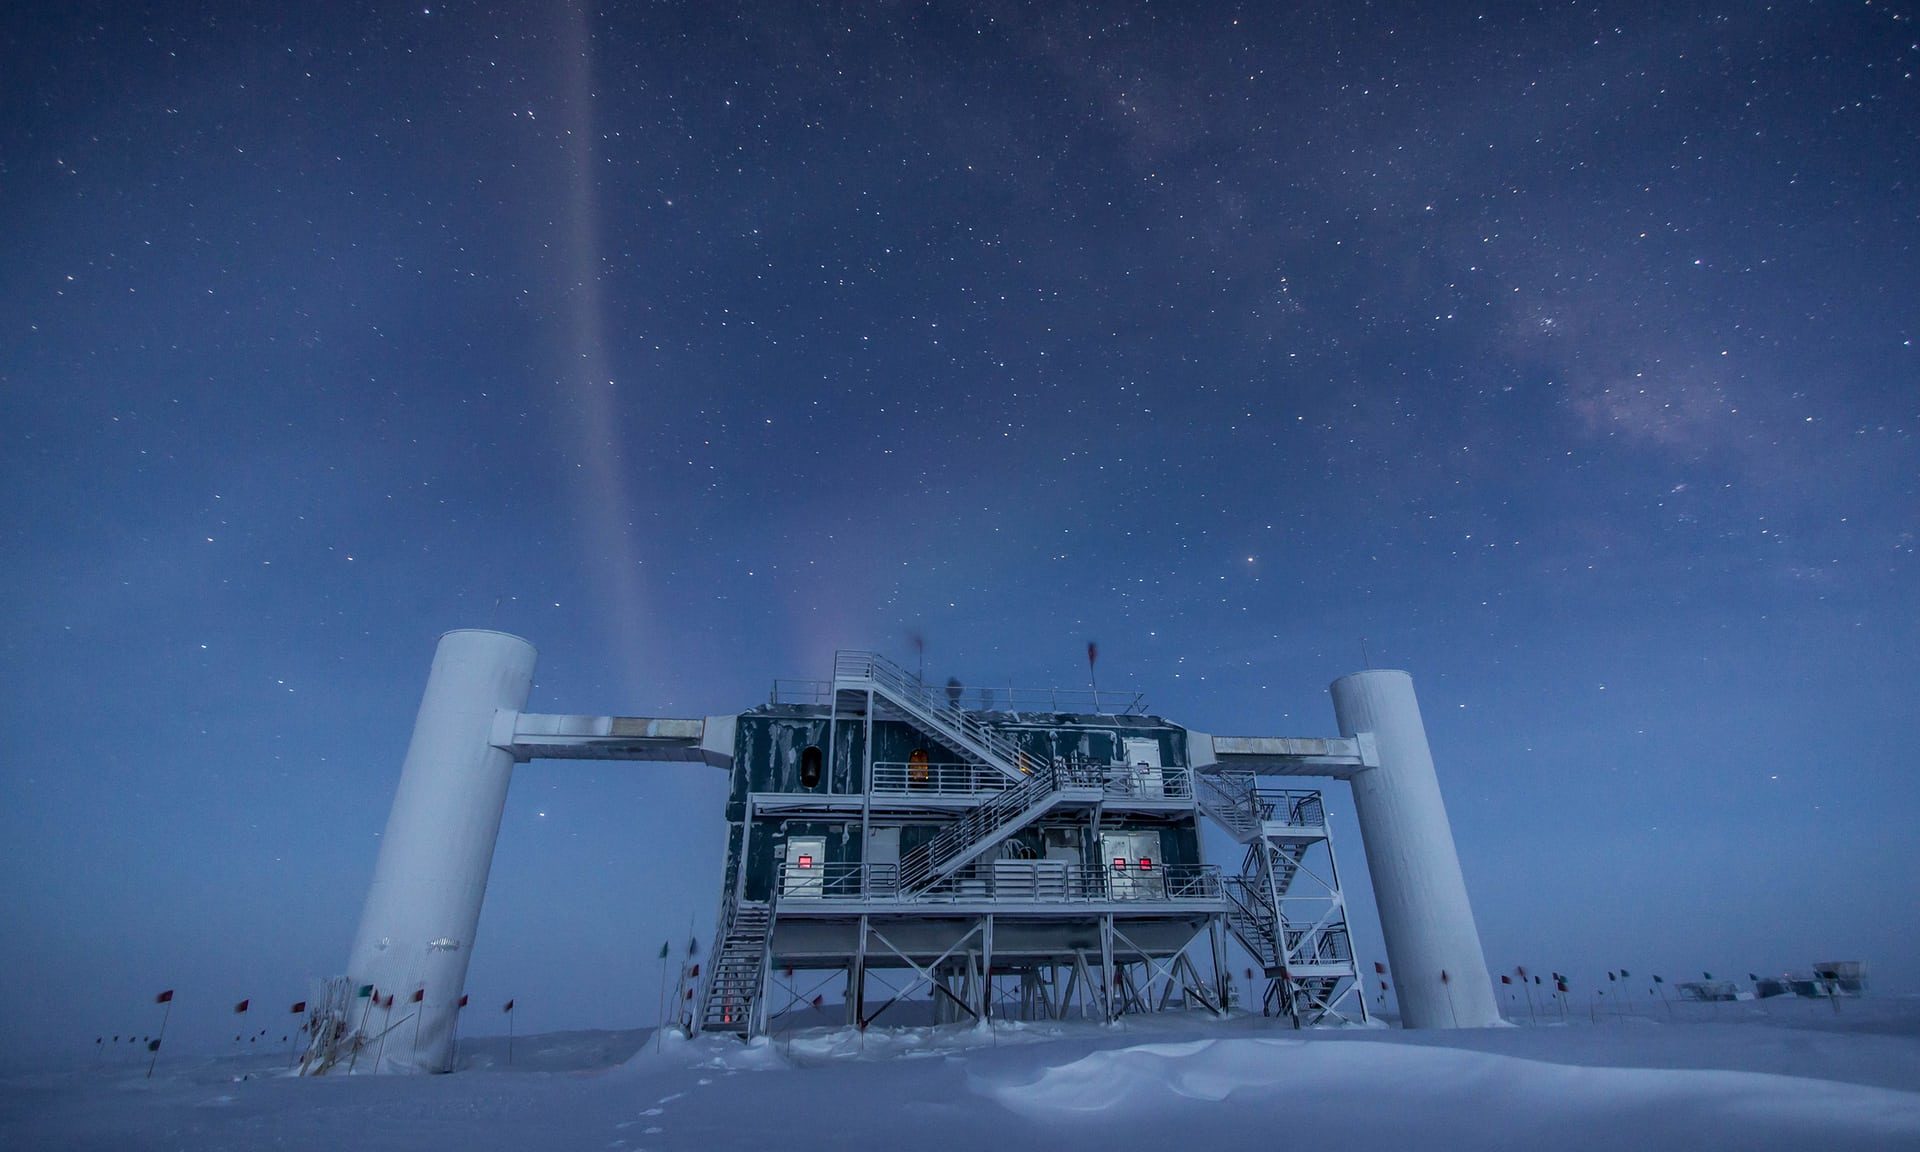 South Pole Station in Antarctica